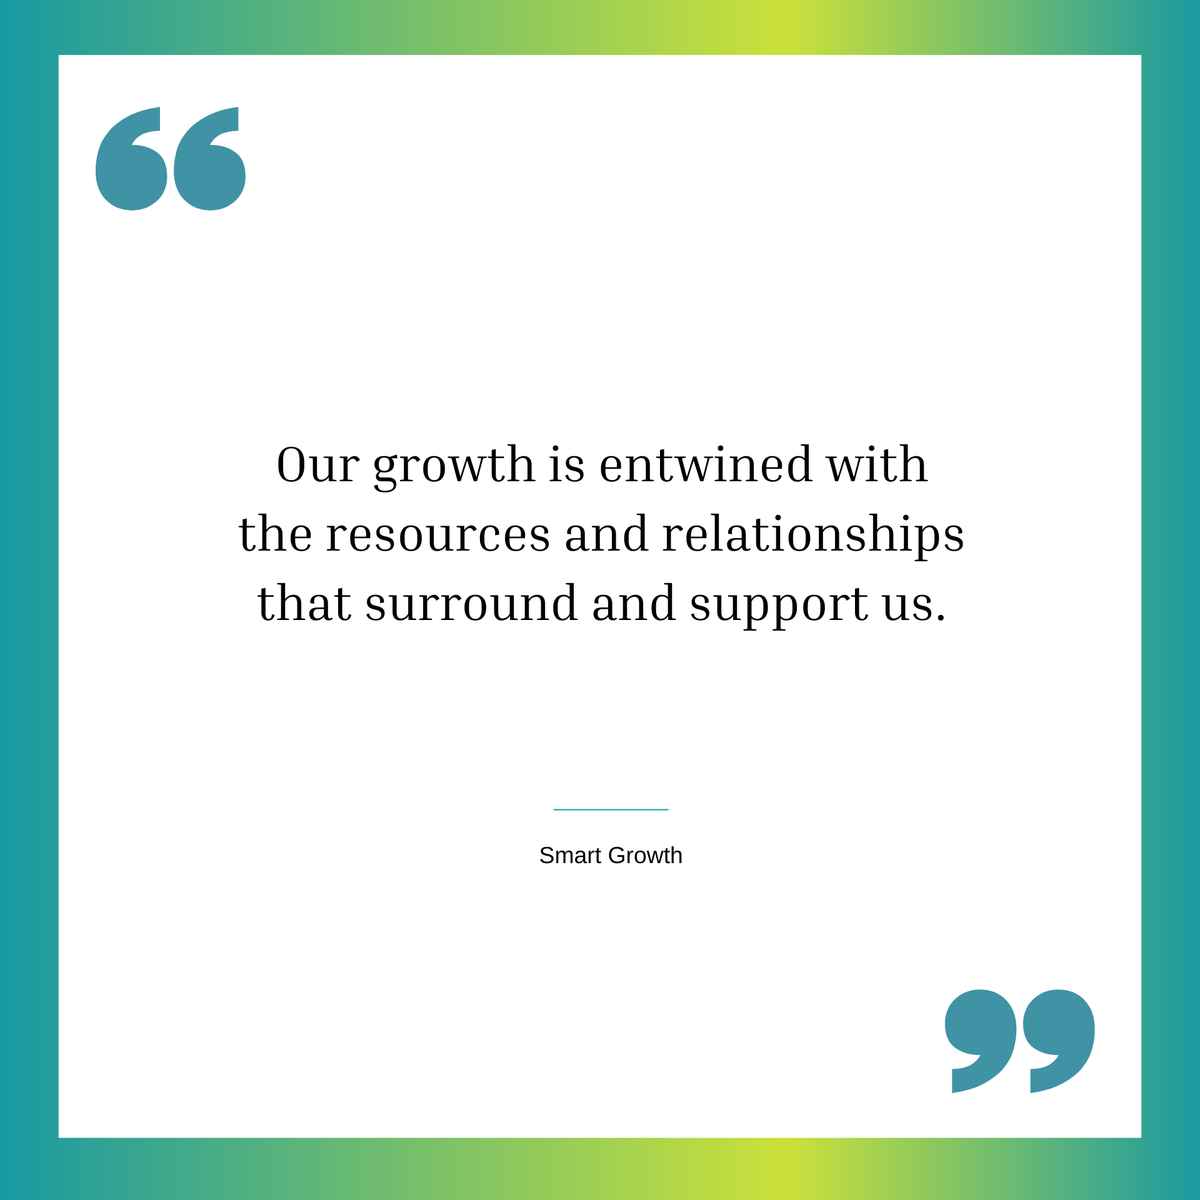 Think of someone who was influential in your growth and development. Would you be where you are without those individuals? I encourage you to send them a quick message to thank them for supporting you and helping you grow.